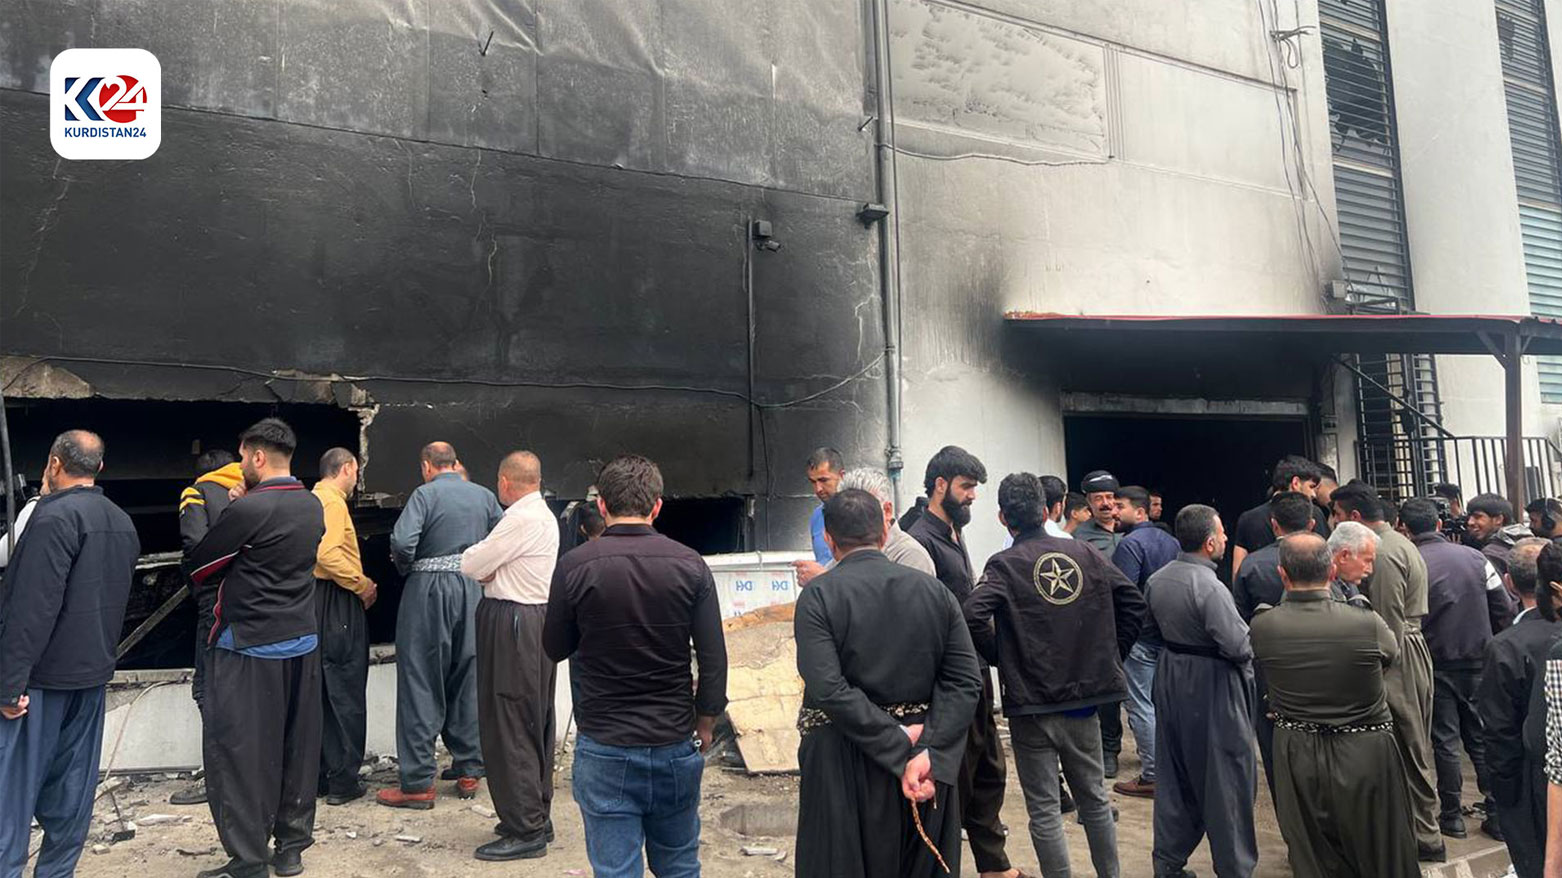 The scene of the burnt shopping mall in Arbat, Sulaimani, as people and shop-owners inspect the premises. (Photo: Kurdistan 24)